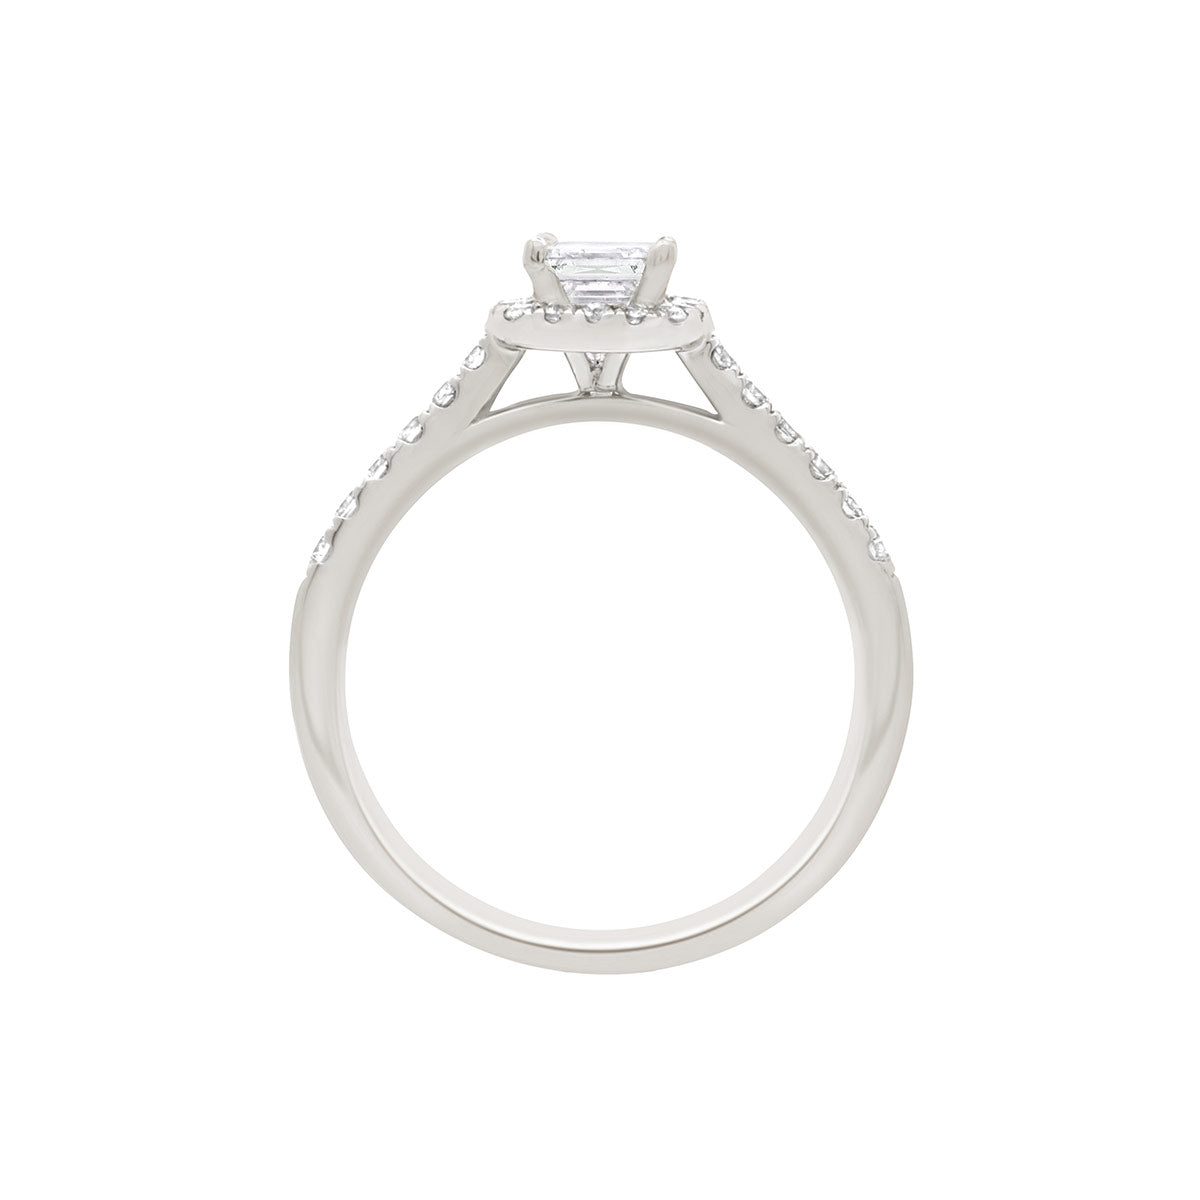 Asscher Halo Diamond Ring in white gold IN AN UPRIGHT VIEW